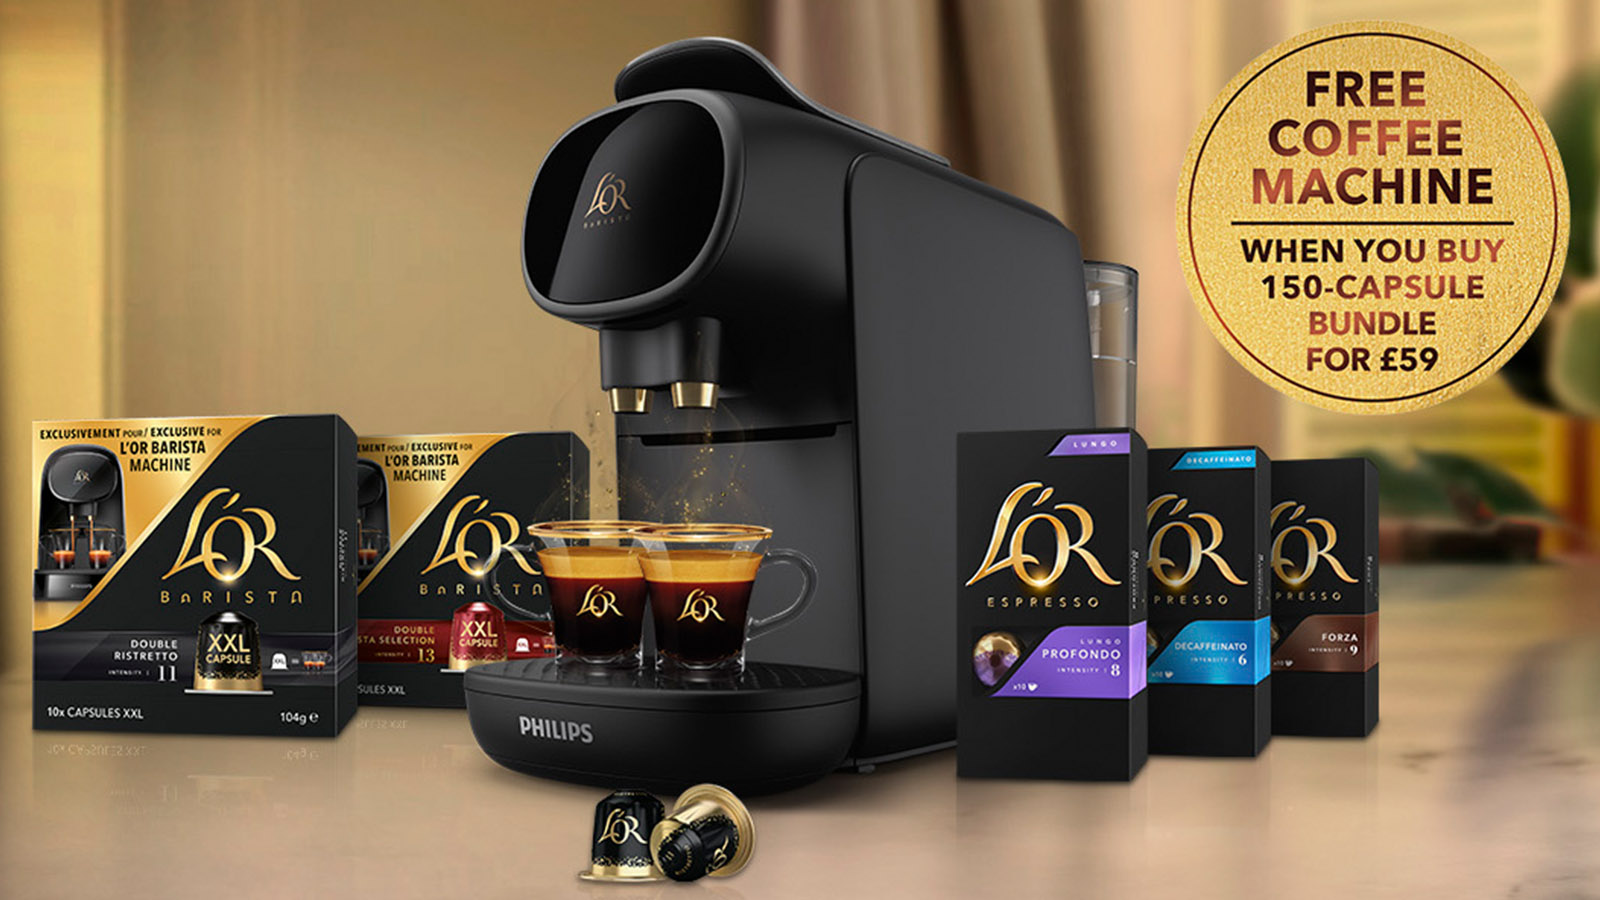 Get a L’Or coffee machine and 150 coffee pods for just £59